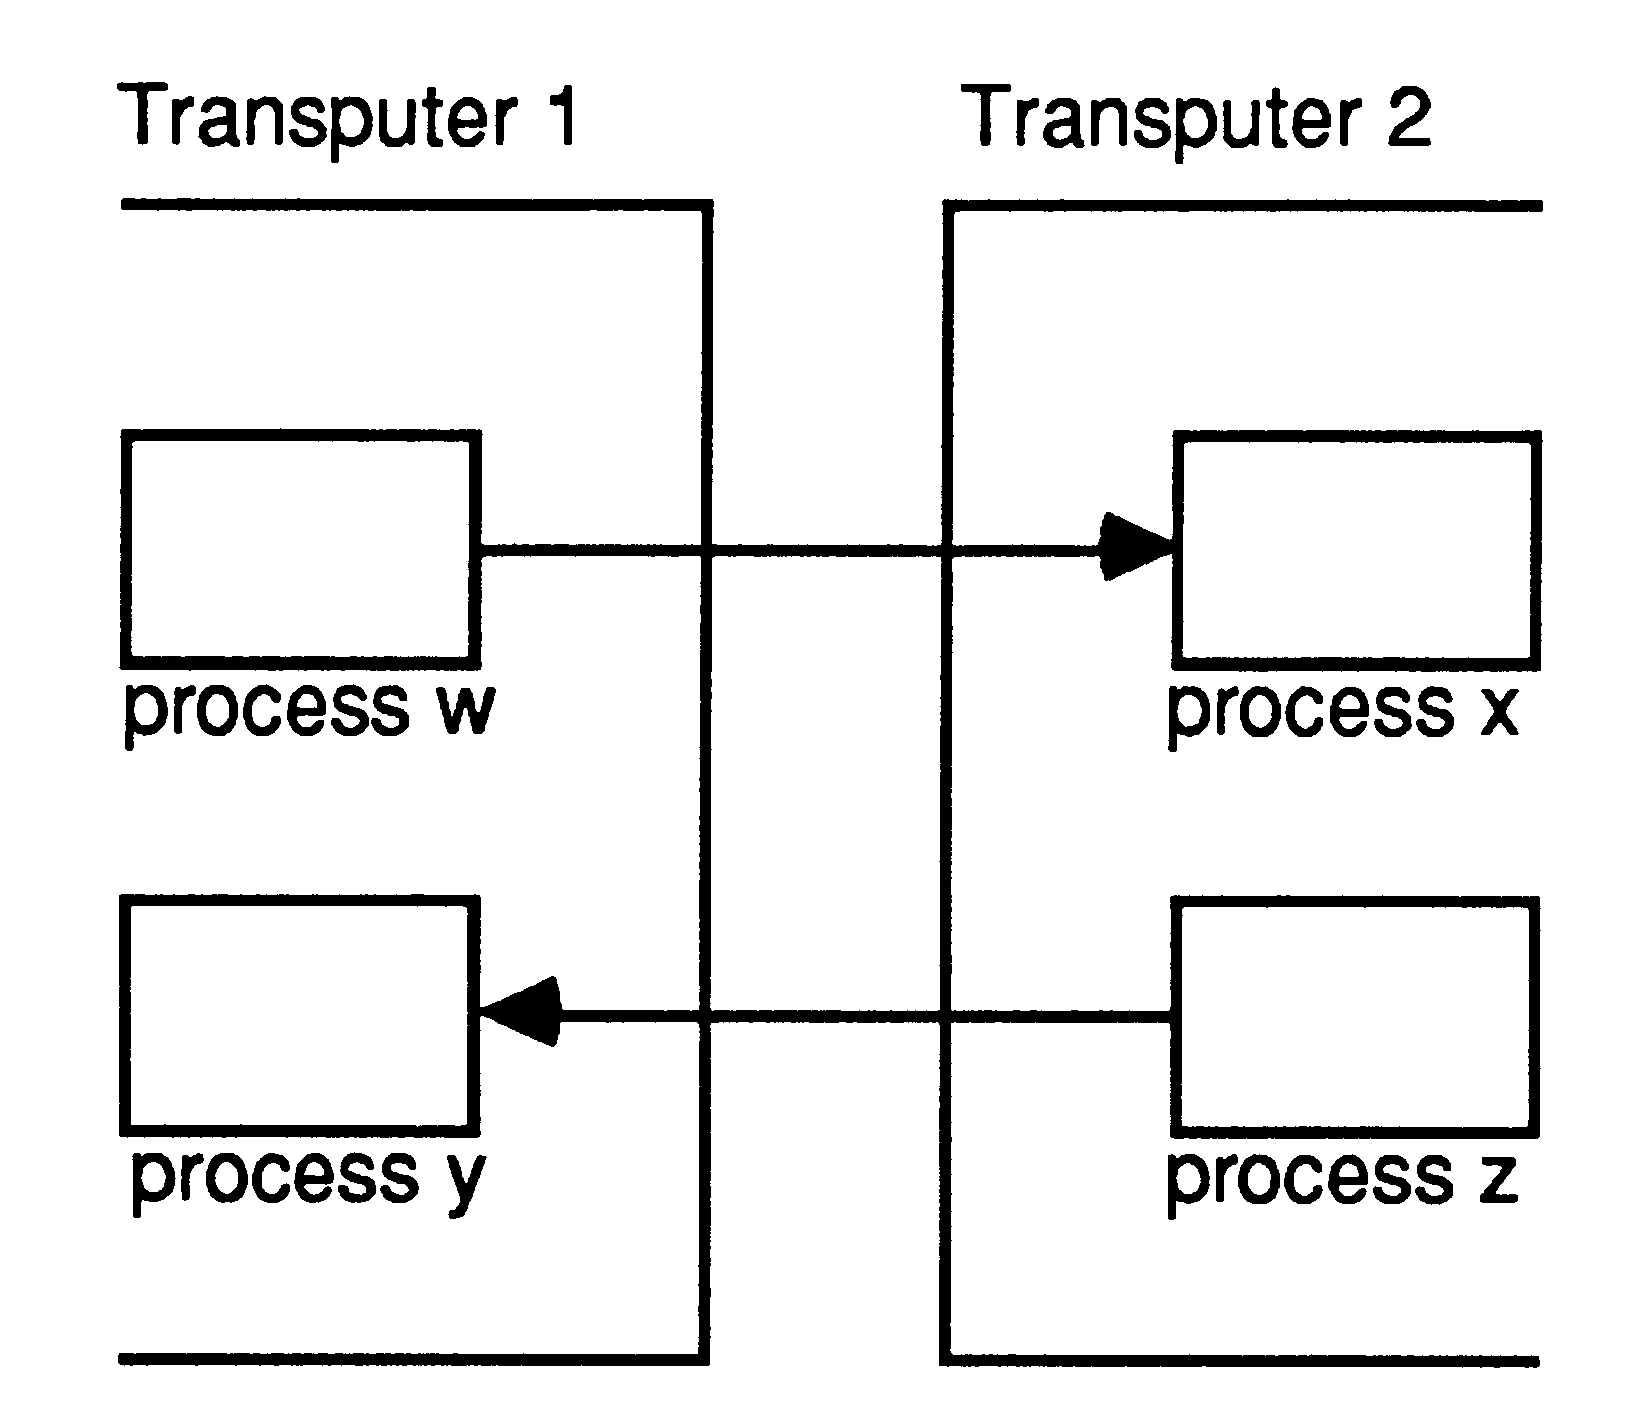 Links provide direct communication between processes on
individual transputers